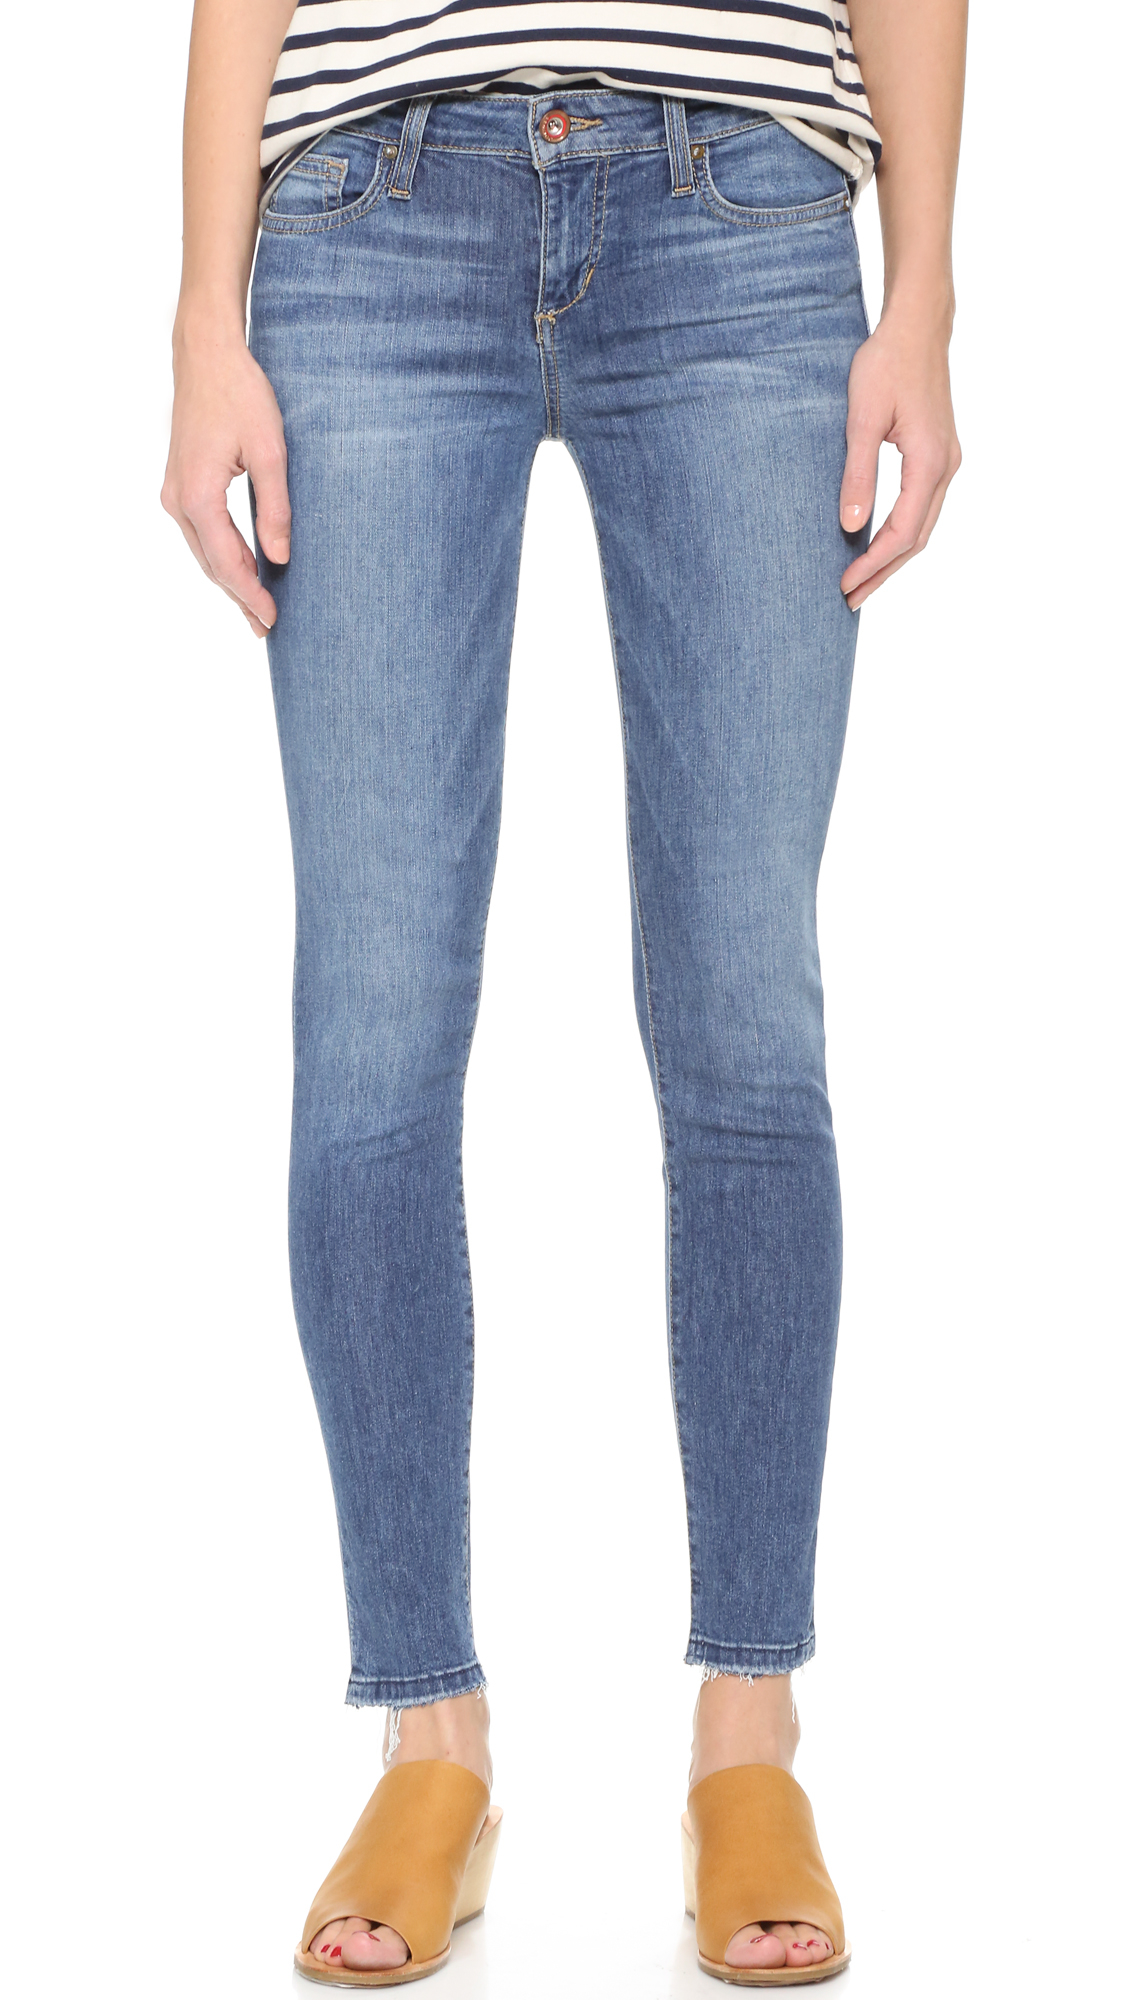 Lyst - Joe'S Jeans The Icon Mid Rise Skinny Ankle Jeans in Blue